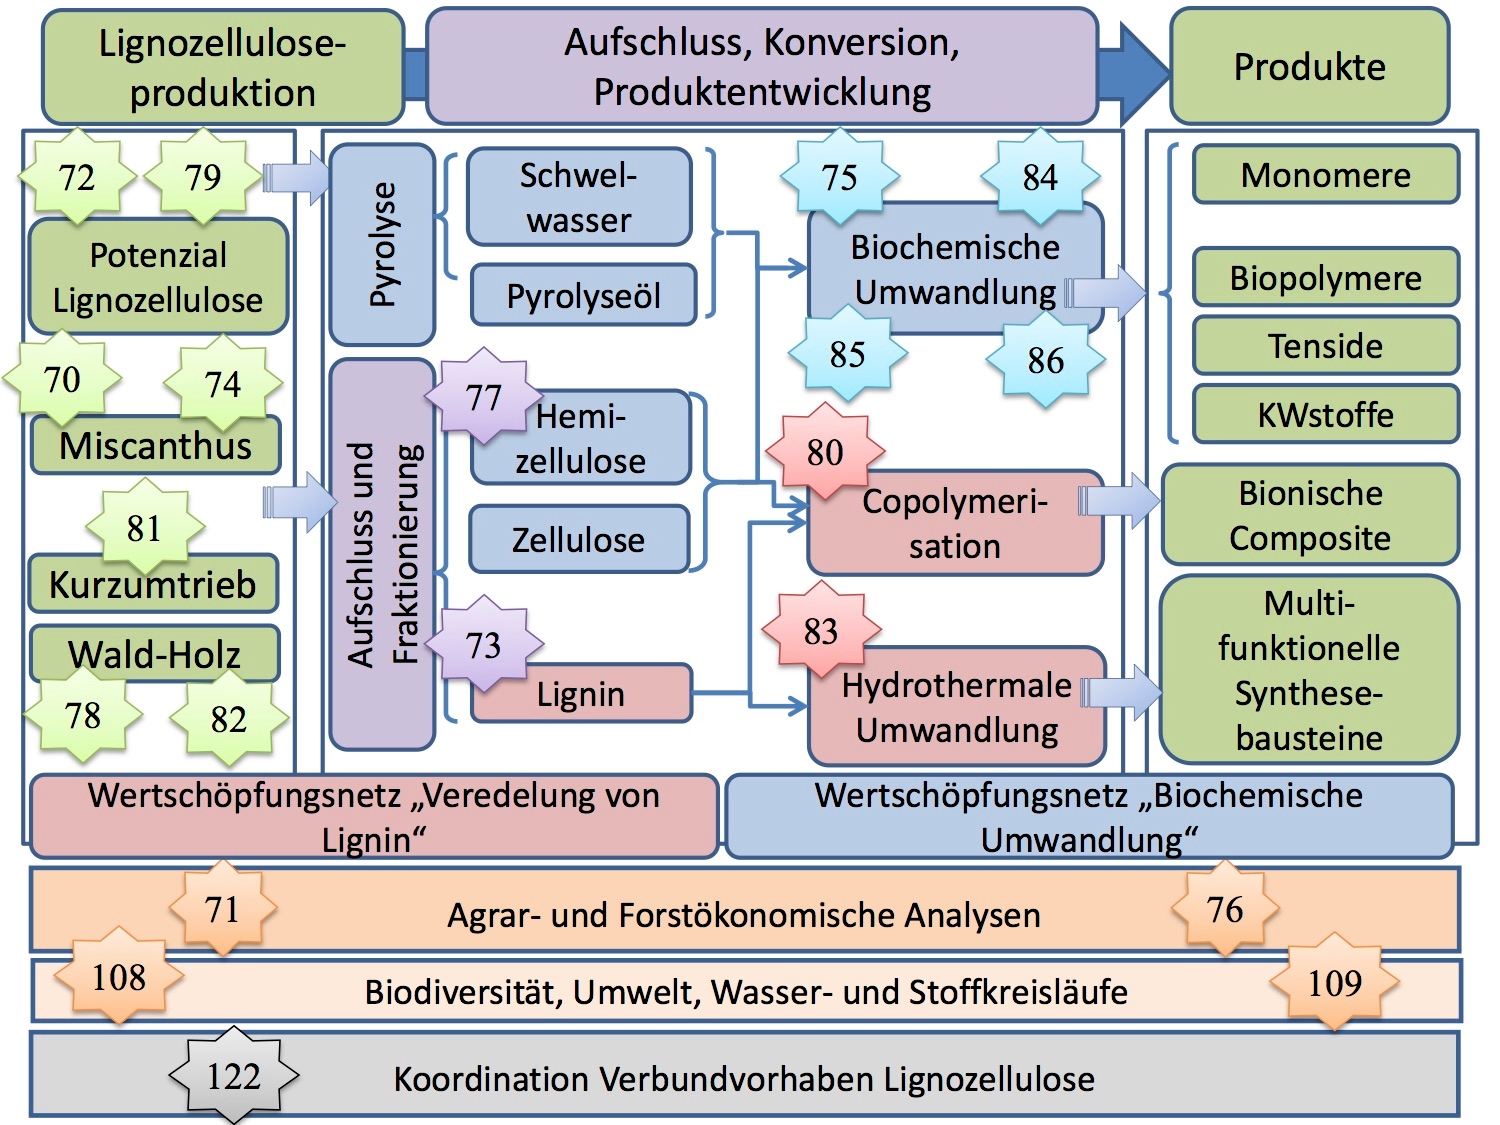 Schematic showing the organisation of the Lignocellulose research consortium.